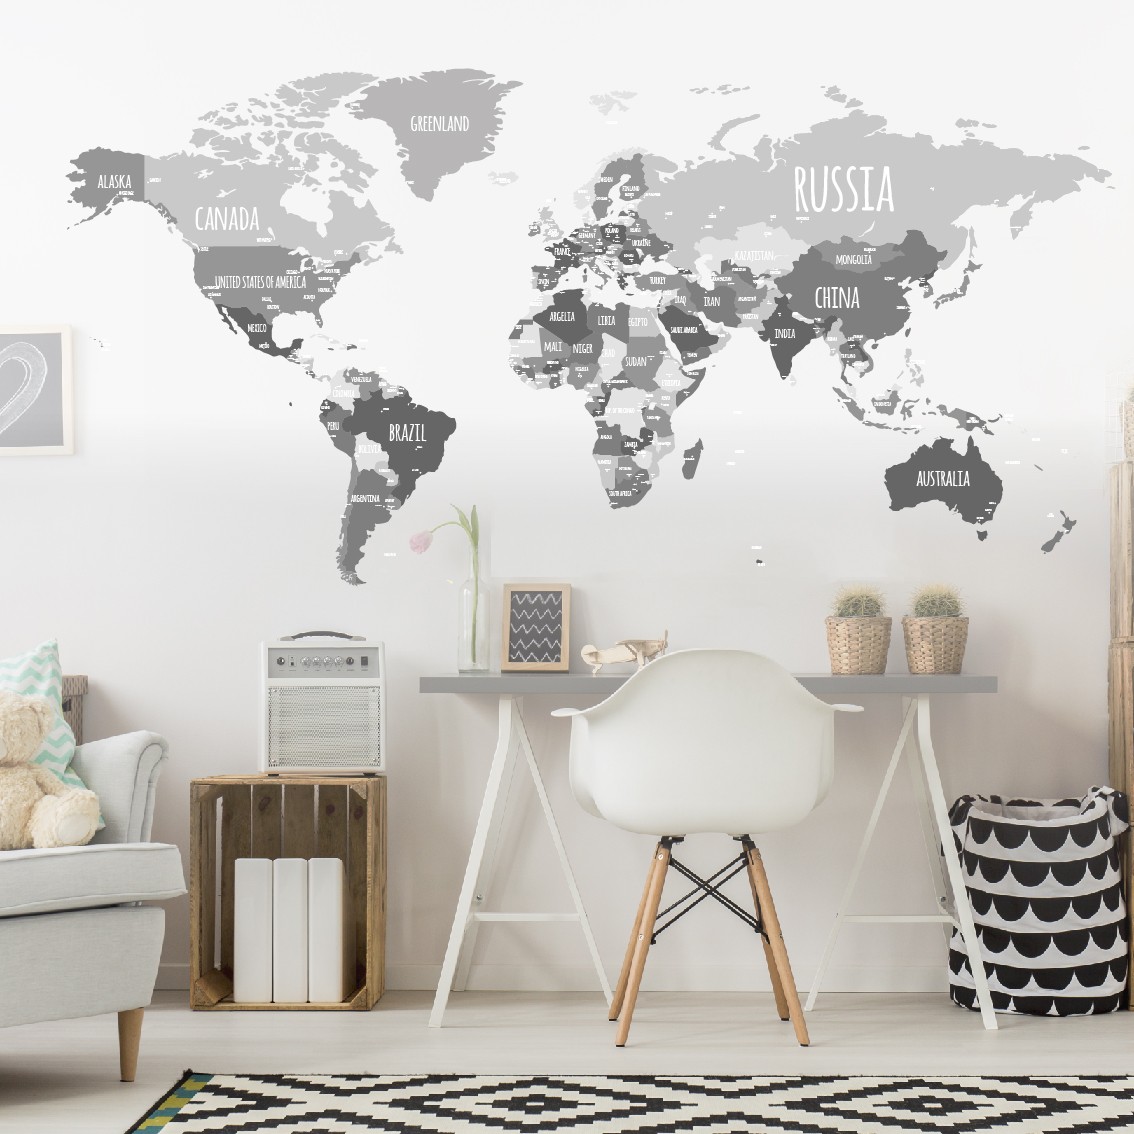 world-map-wall-decal-country-names